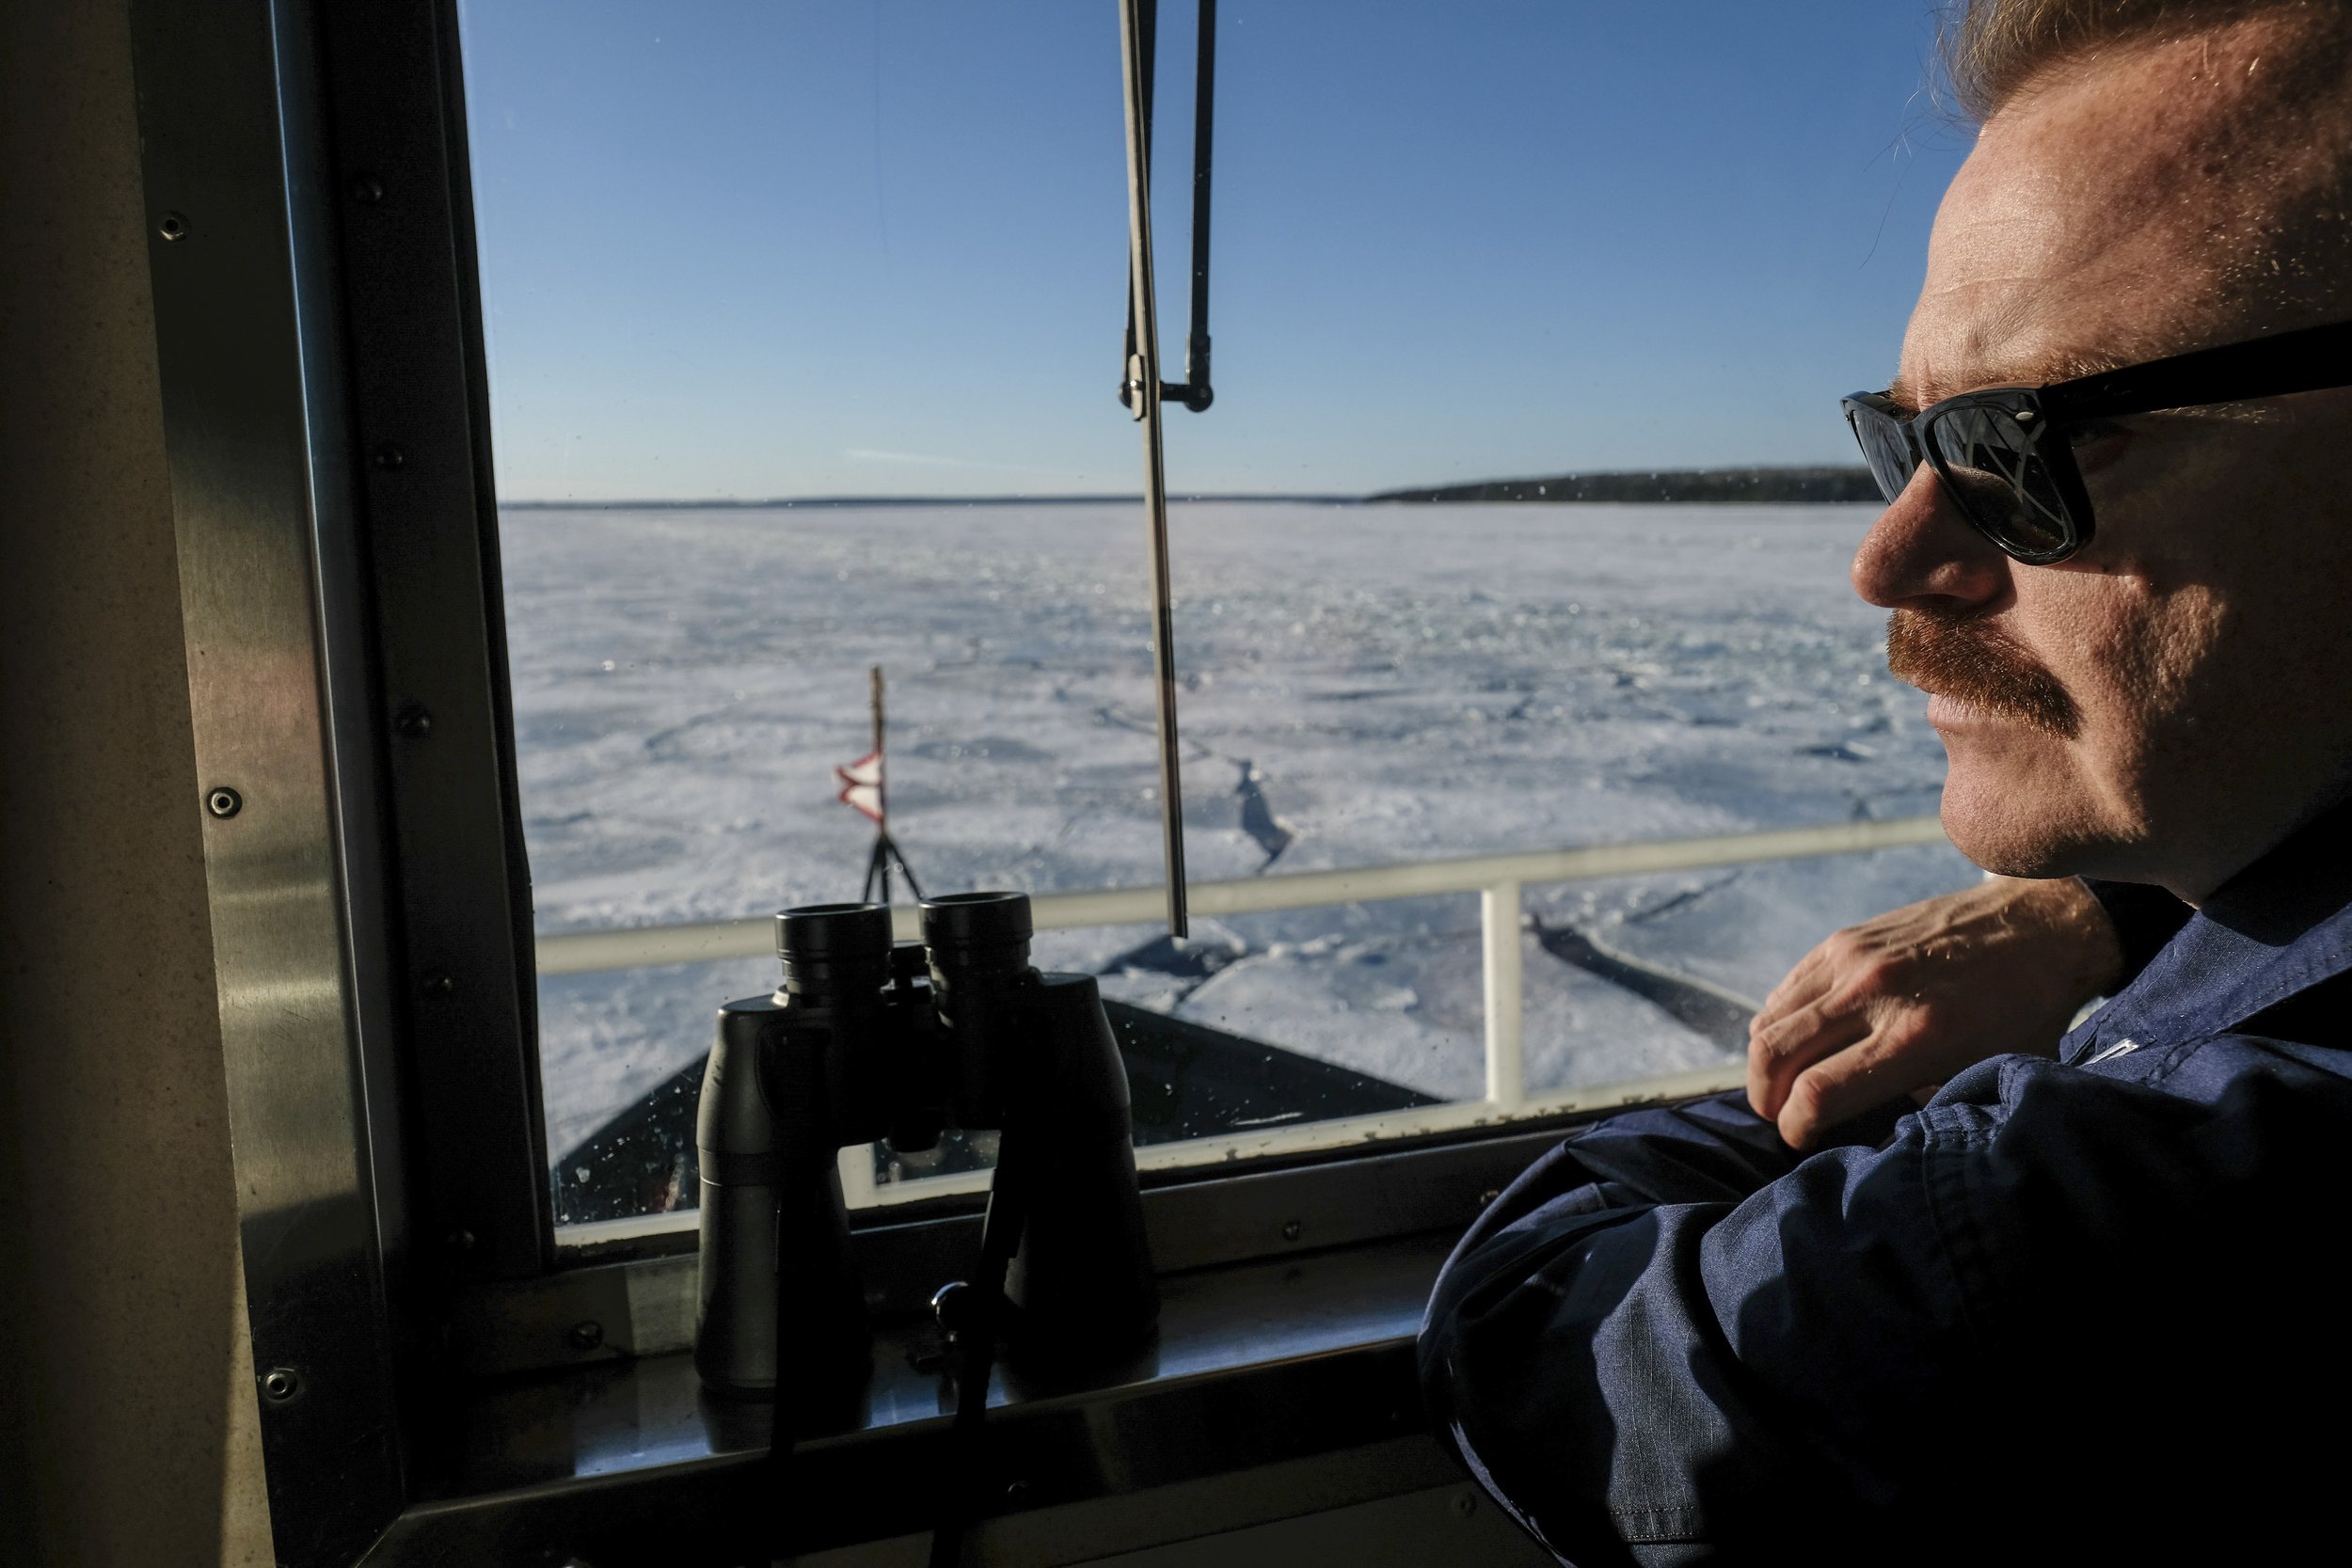  Captain Mike Overstreet of the US Coast Guard Cutter Katmai Bay scans the horizon of the St. Mary's River for ice sheets from the bridge of his vessel, USCGC Katmai Bay on Tuesday, March 14, 2023. The Katmai Bay is one of the ships in the US Coast G